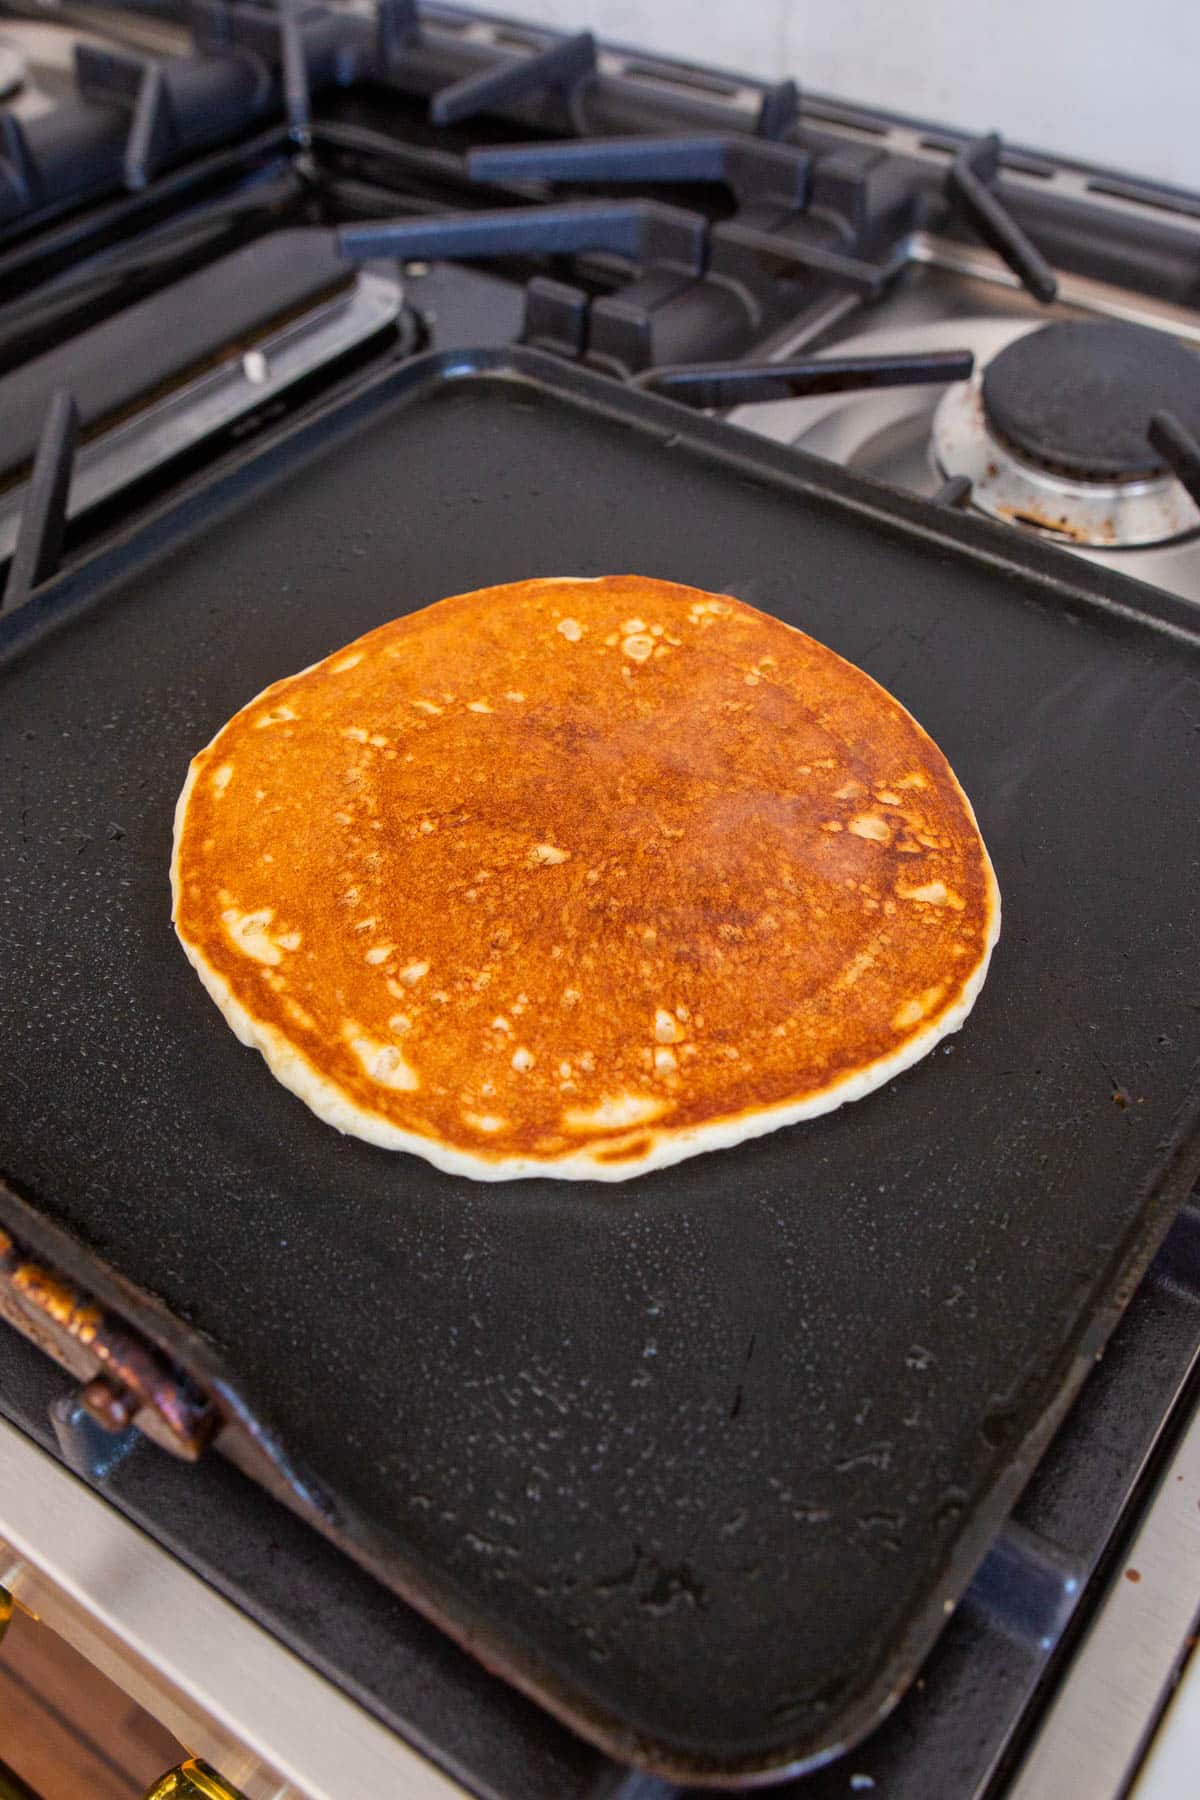 A large pancake cooking on a square non-stick griddle pan on a stove-top.